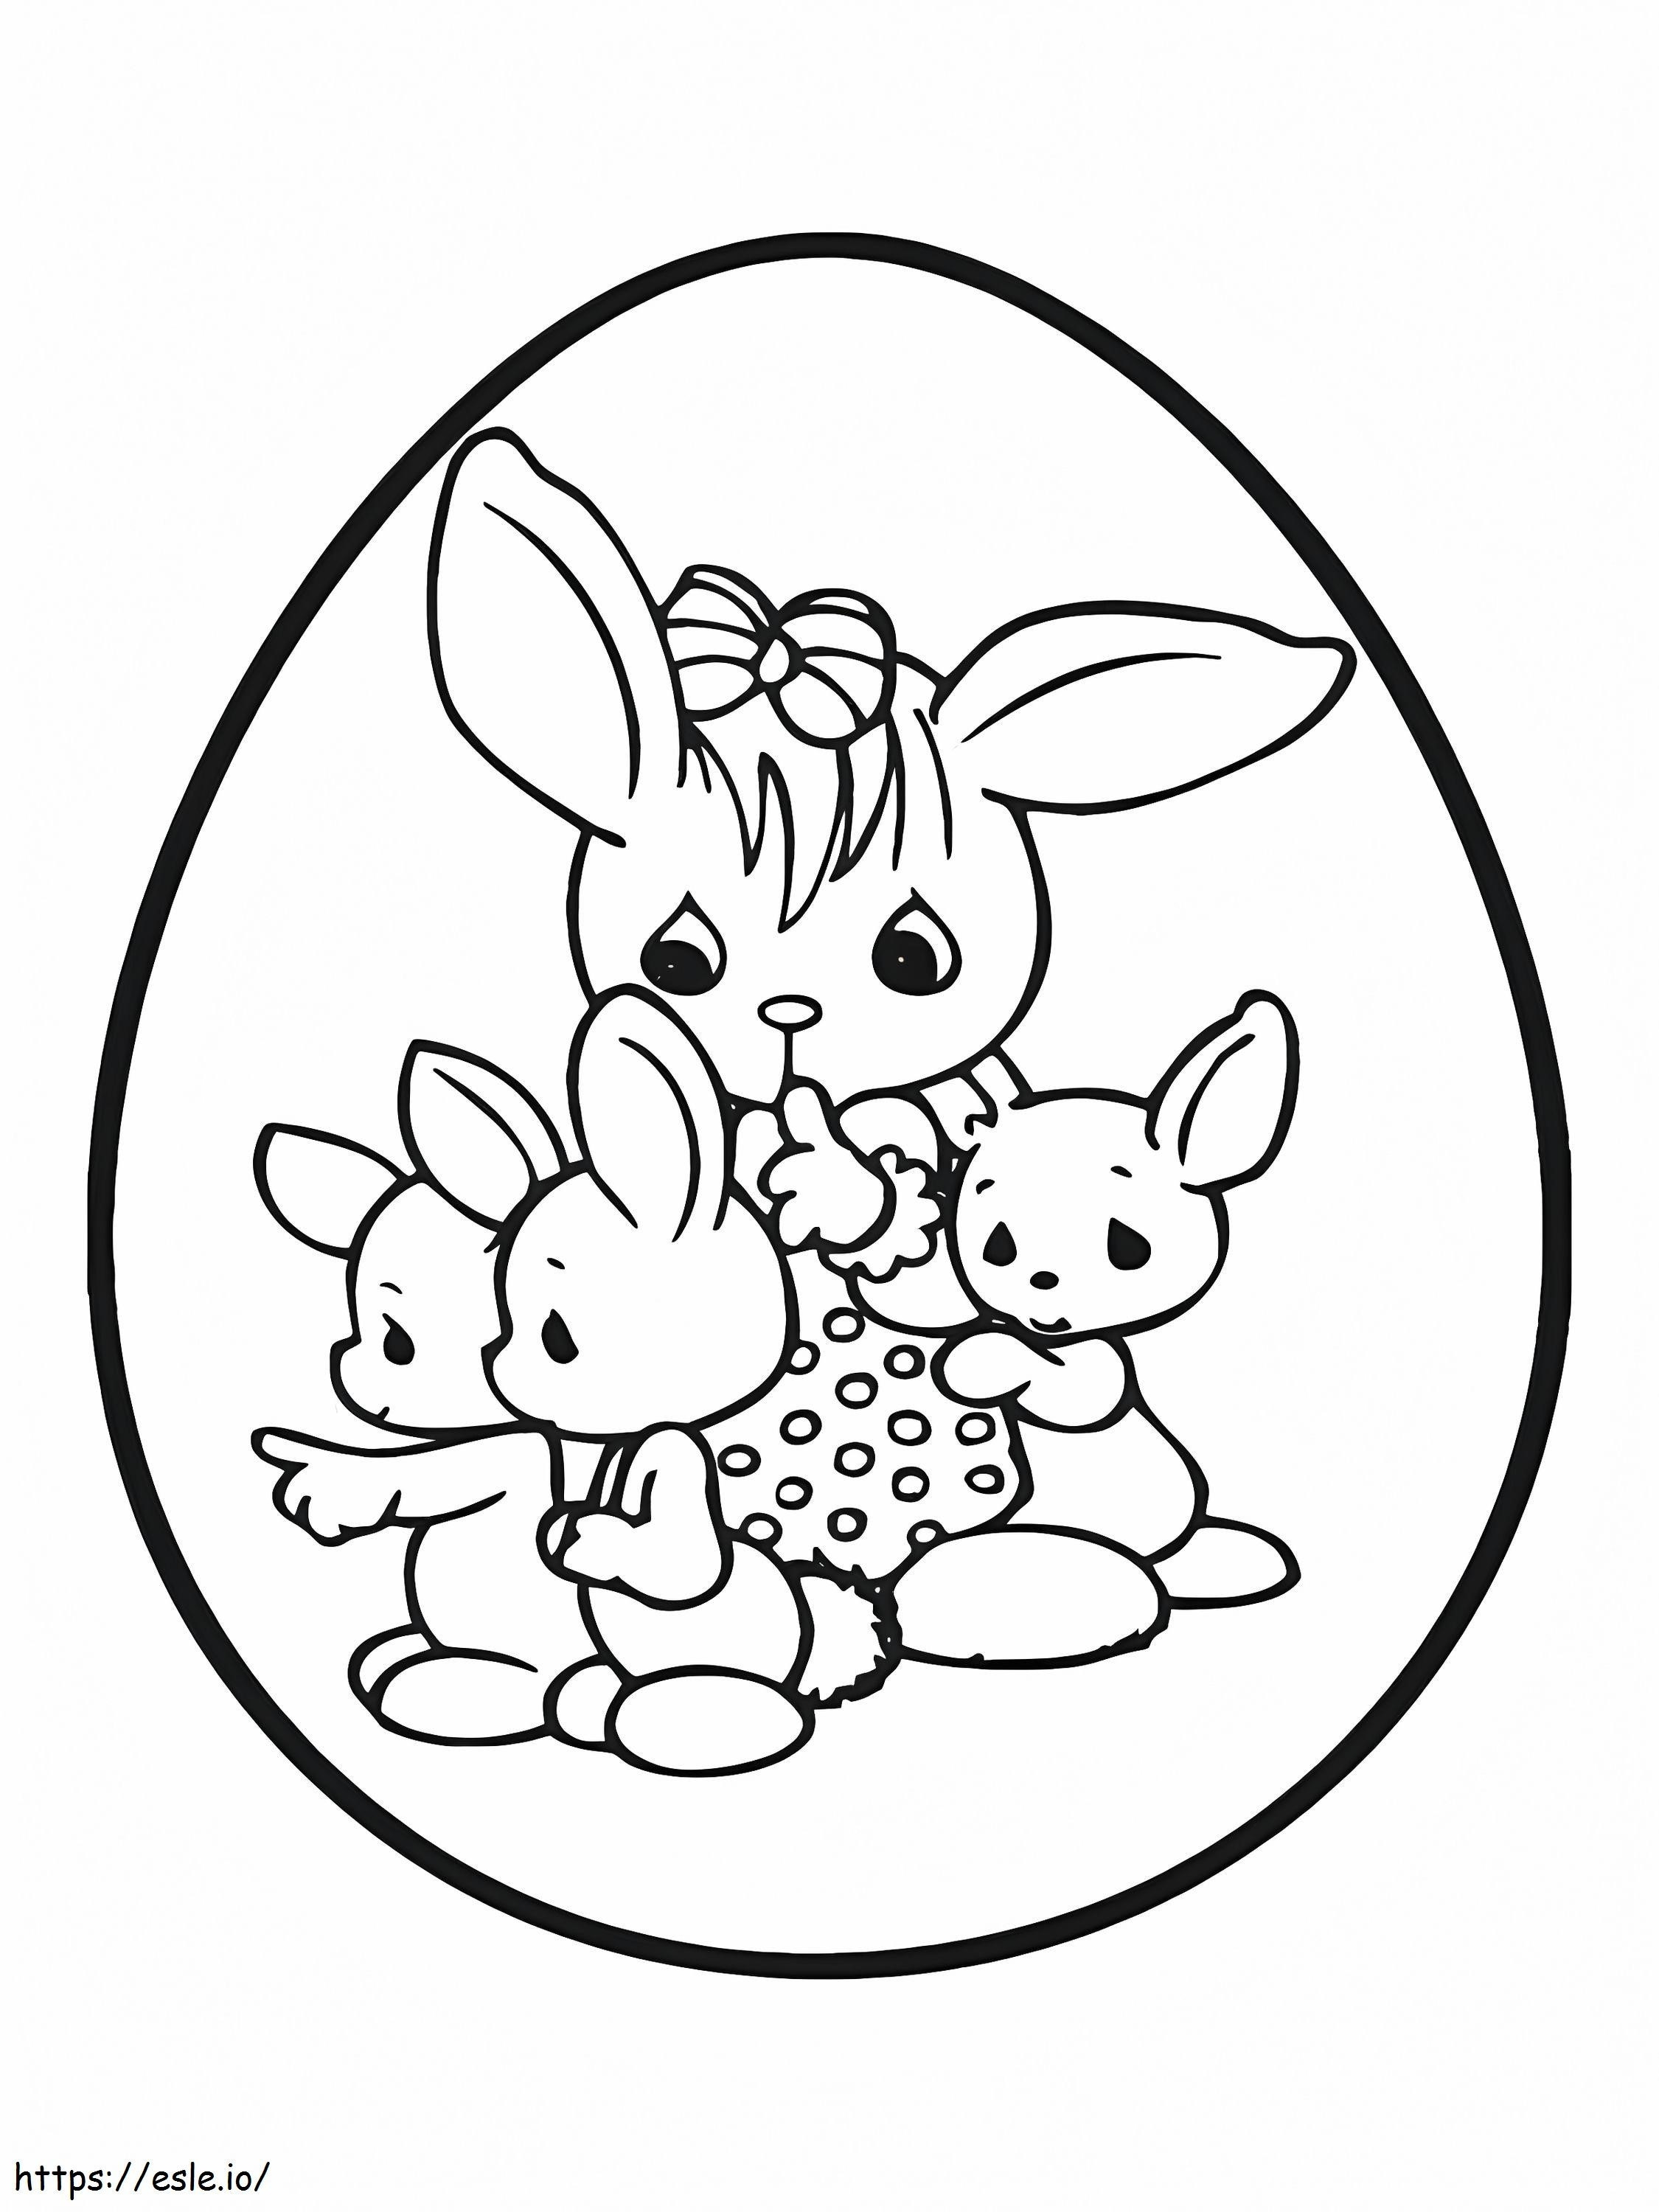 Easter Bunnies coloring page